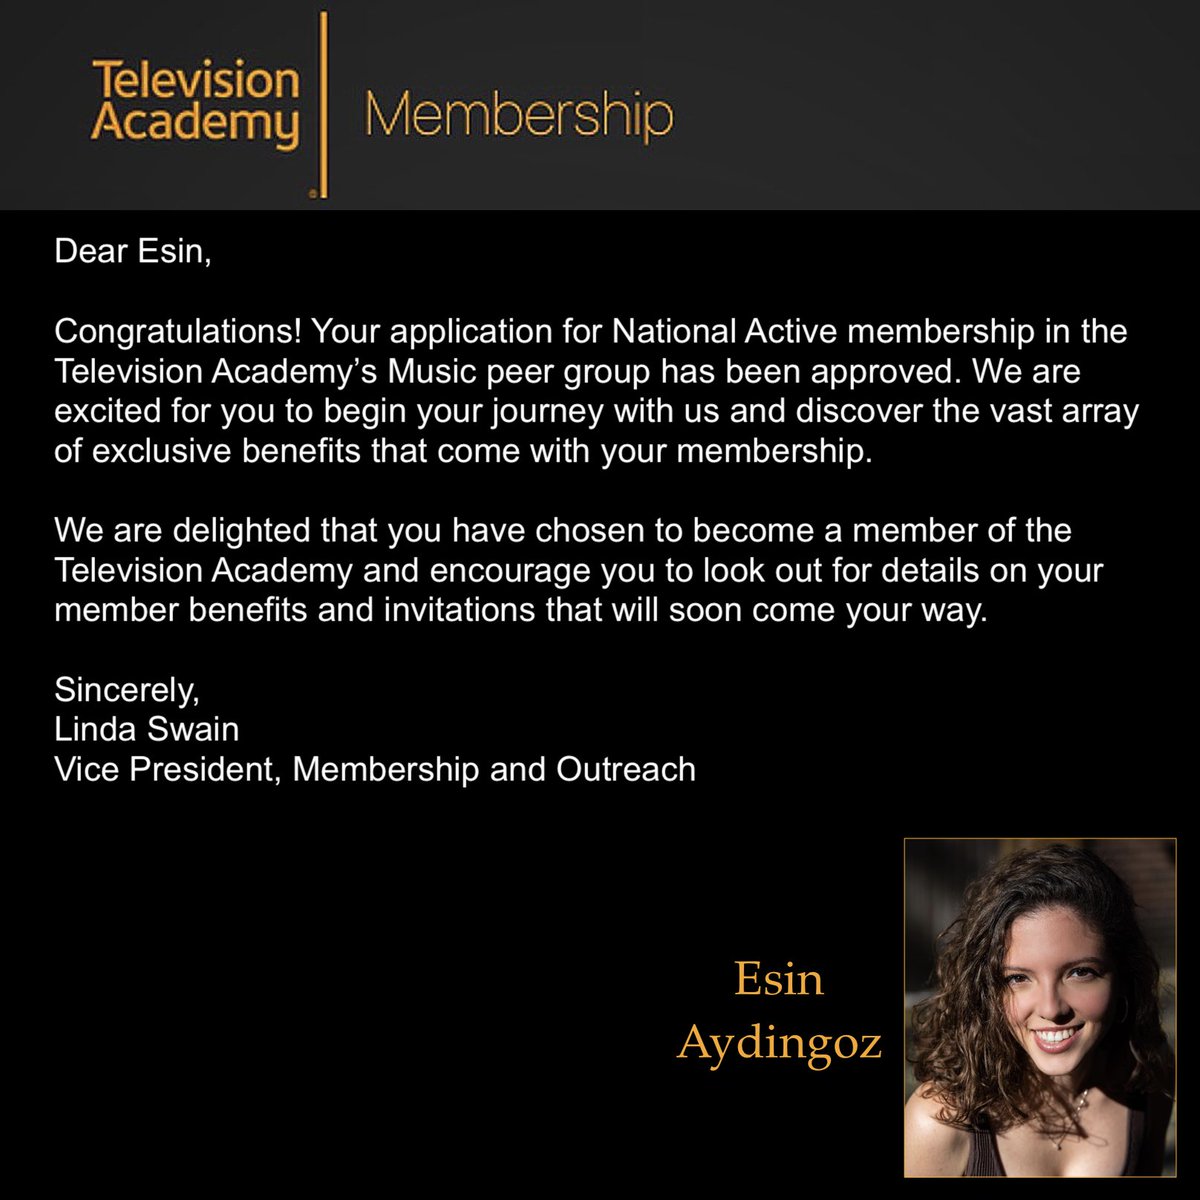 Please help us welcome the newest member to the Television Academy, our wonderfully talented client, who has one of the biggest hearts in our industry,
@esinaydingoz! 

#esinaydingoz #femalecomposer #televisionacademy #tvacademy @bmi #composer #tvcomposer #womancomposer #soproud